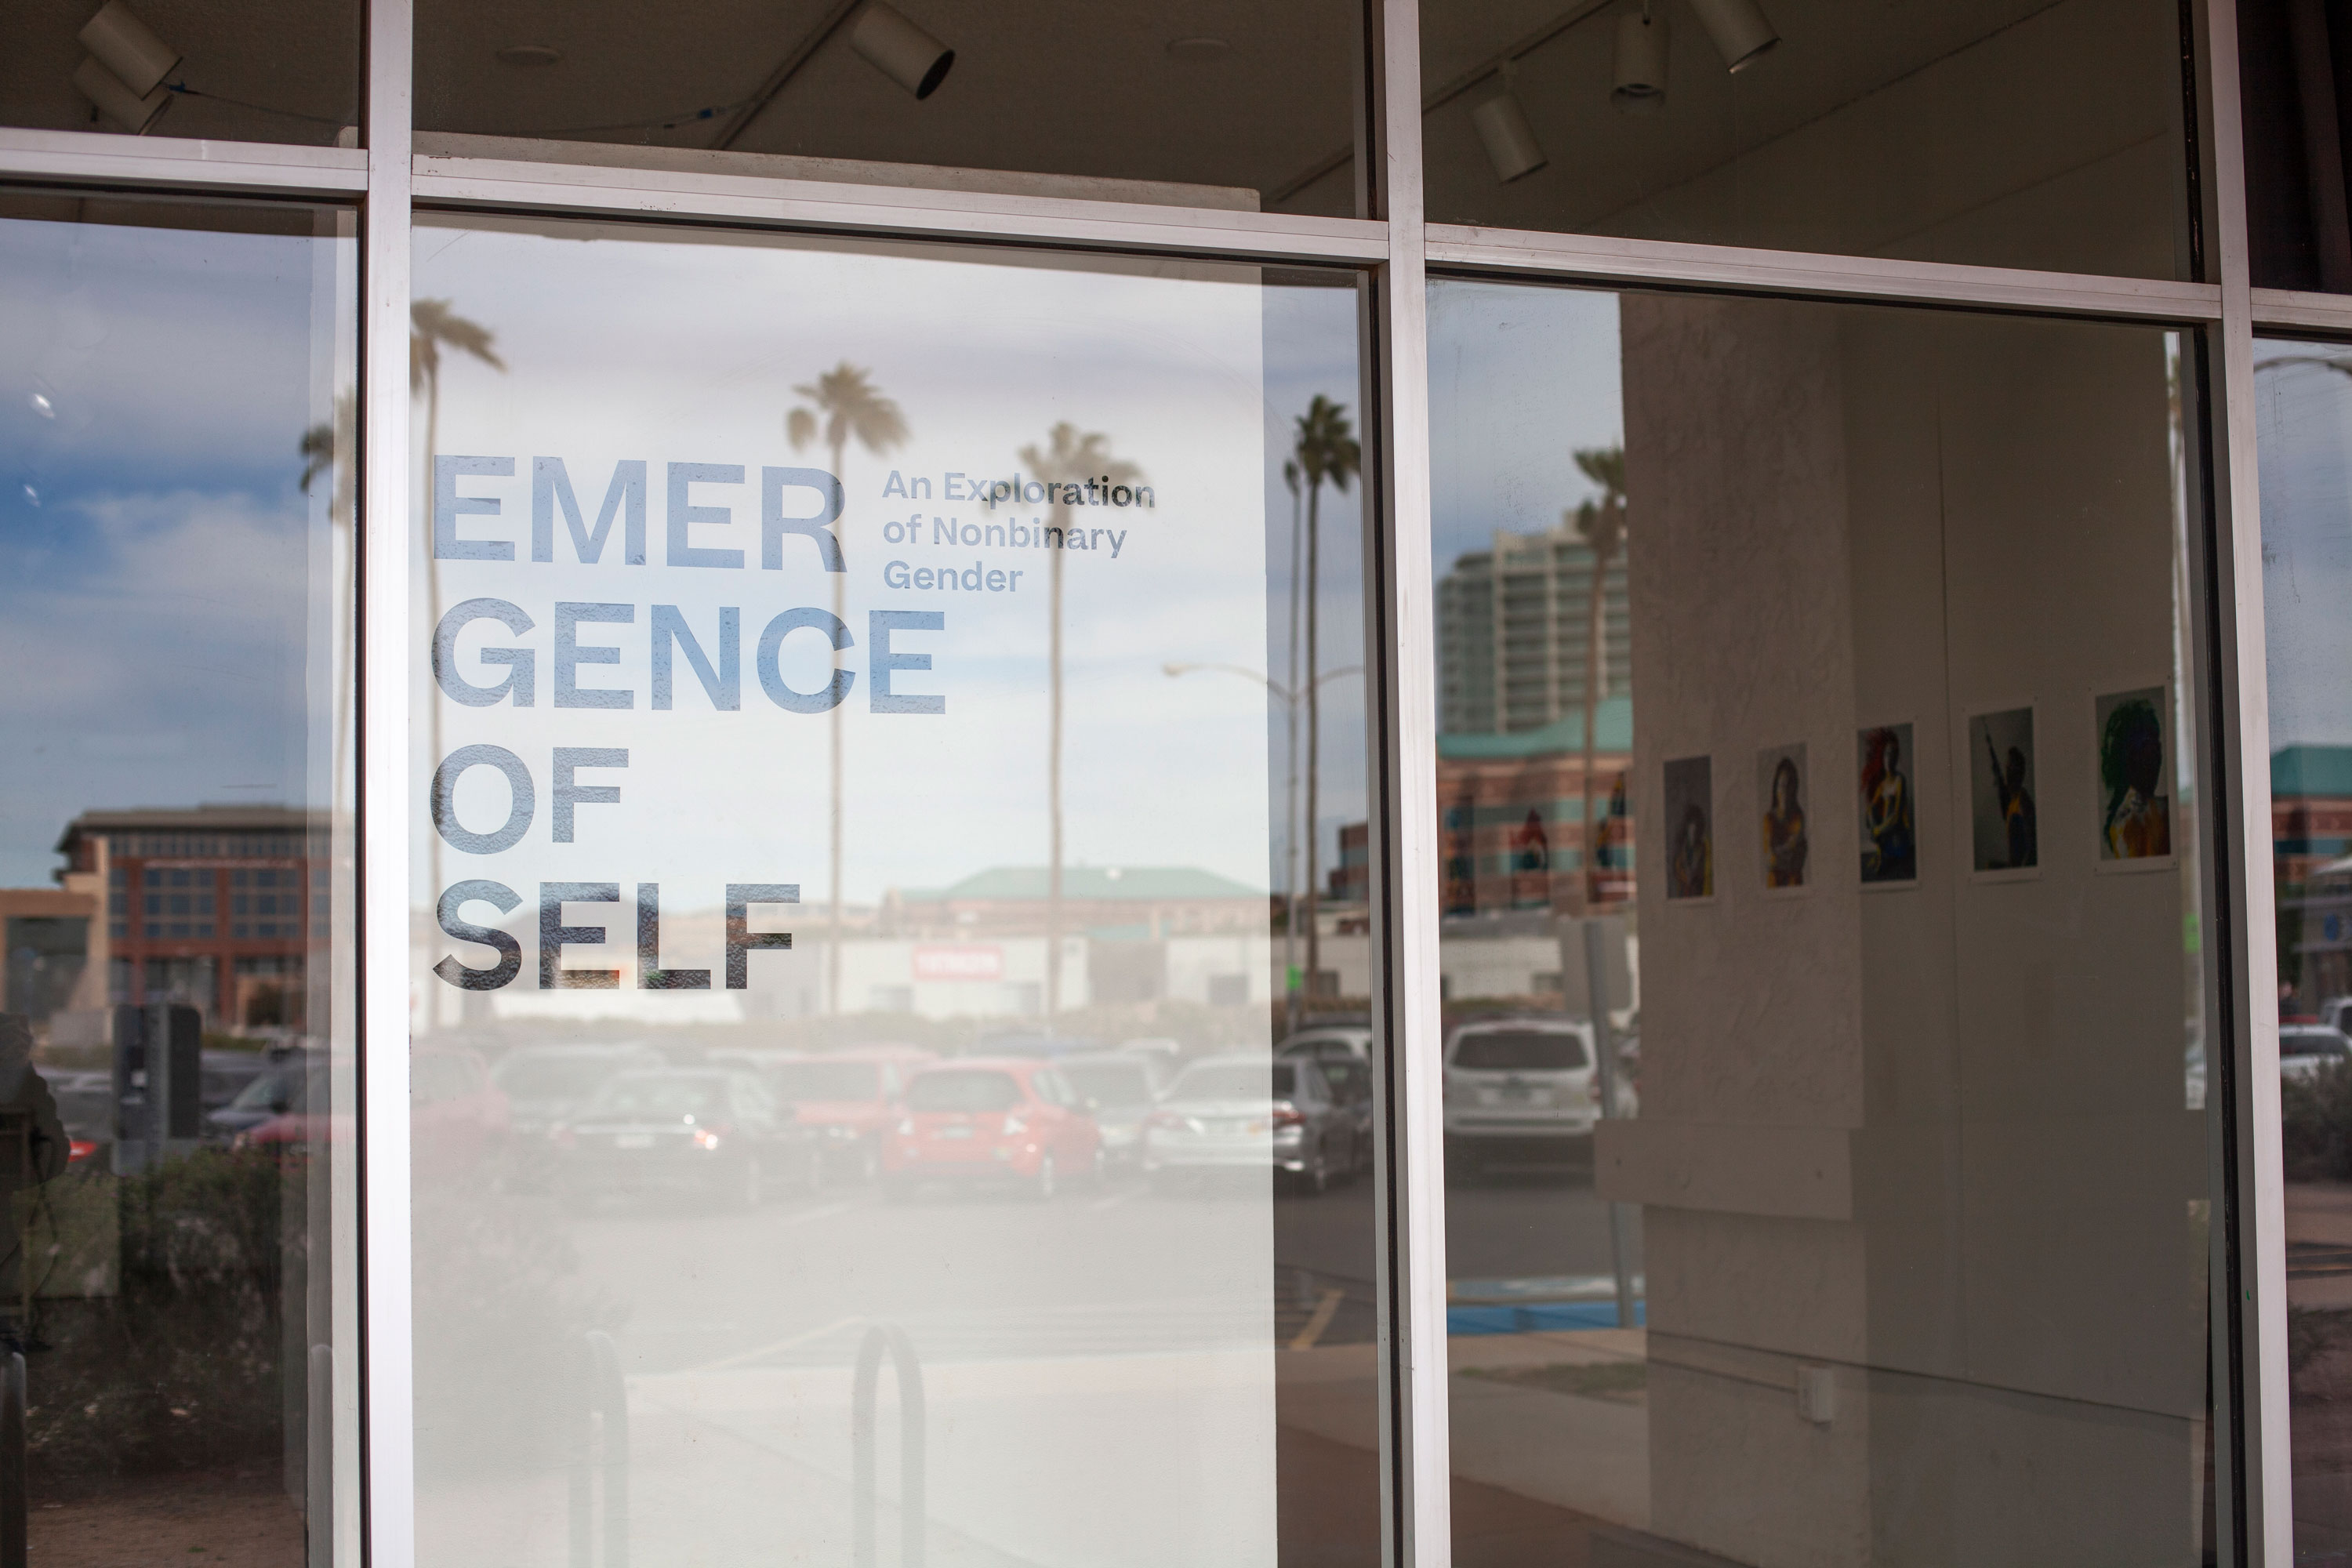 photograph of exhibition pylon with the title "emergence of self"